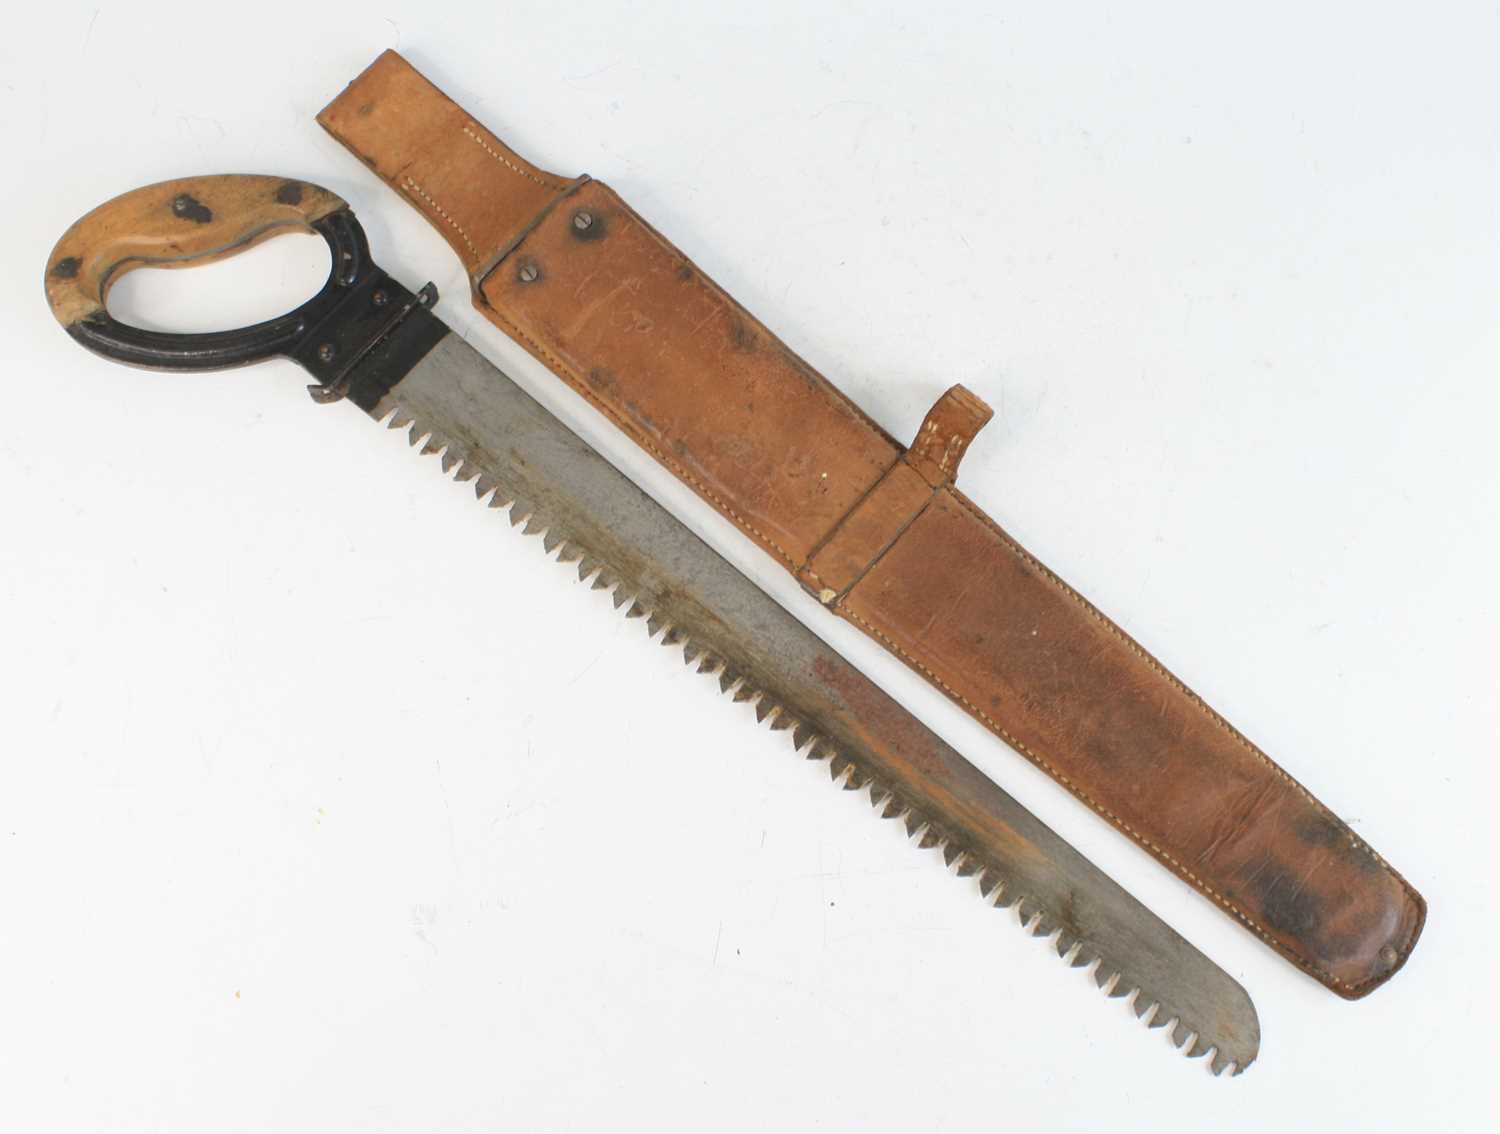 A German Third Reich Pioneer saw (Stichsage), the 40.5cm steel blade dated 1939, housed in the